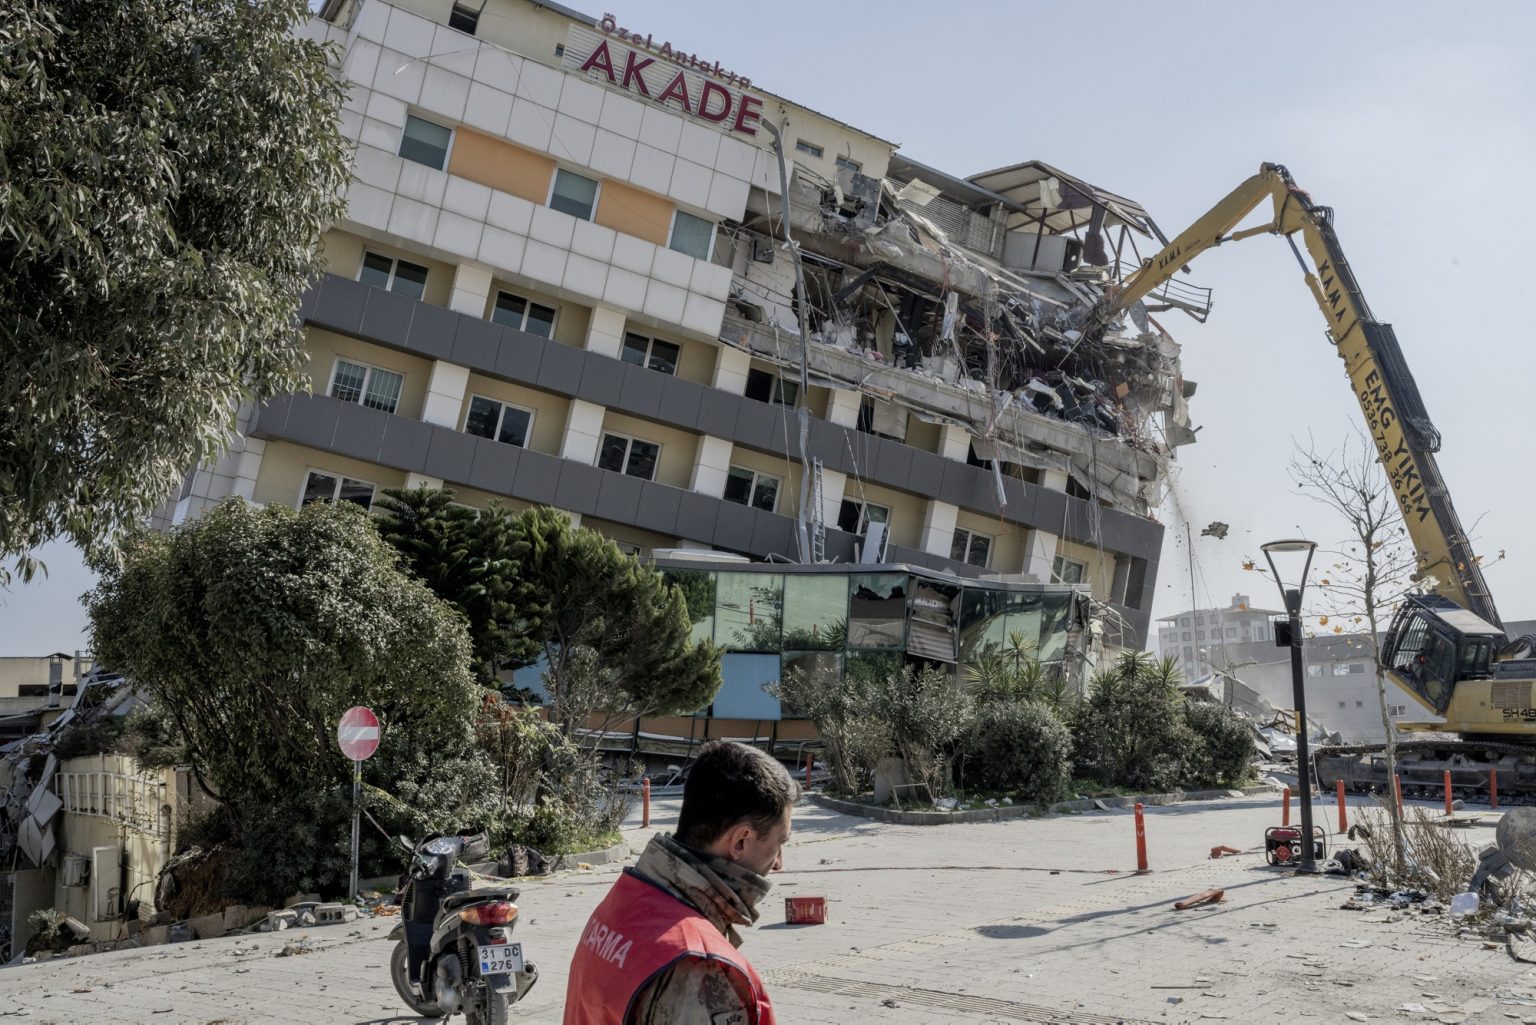 Antakya, Turkey, February 2023 - The aftermath of the earthquake that hit southern Turkey and northern Syria.  The earthquake-damaged academy hospital of the city of Antakya is torn down by authorities. ><
Antakya, Turchia, febbraio 2023  Le conseguenze del terremoto che ha colpito la Turchia del Sud e la Siria del nord.